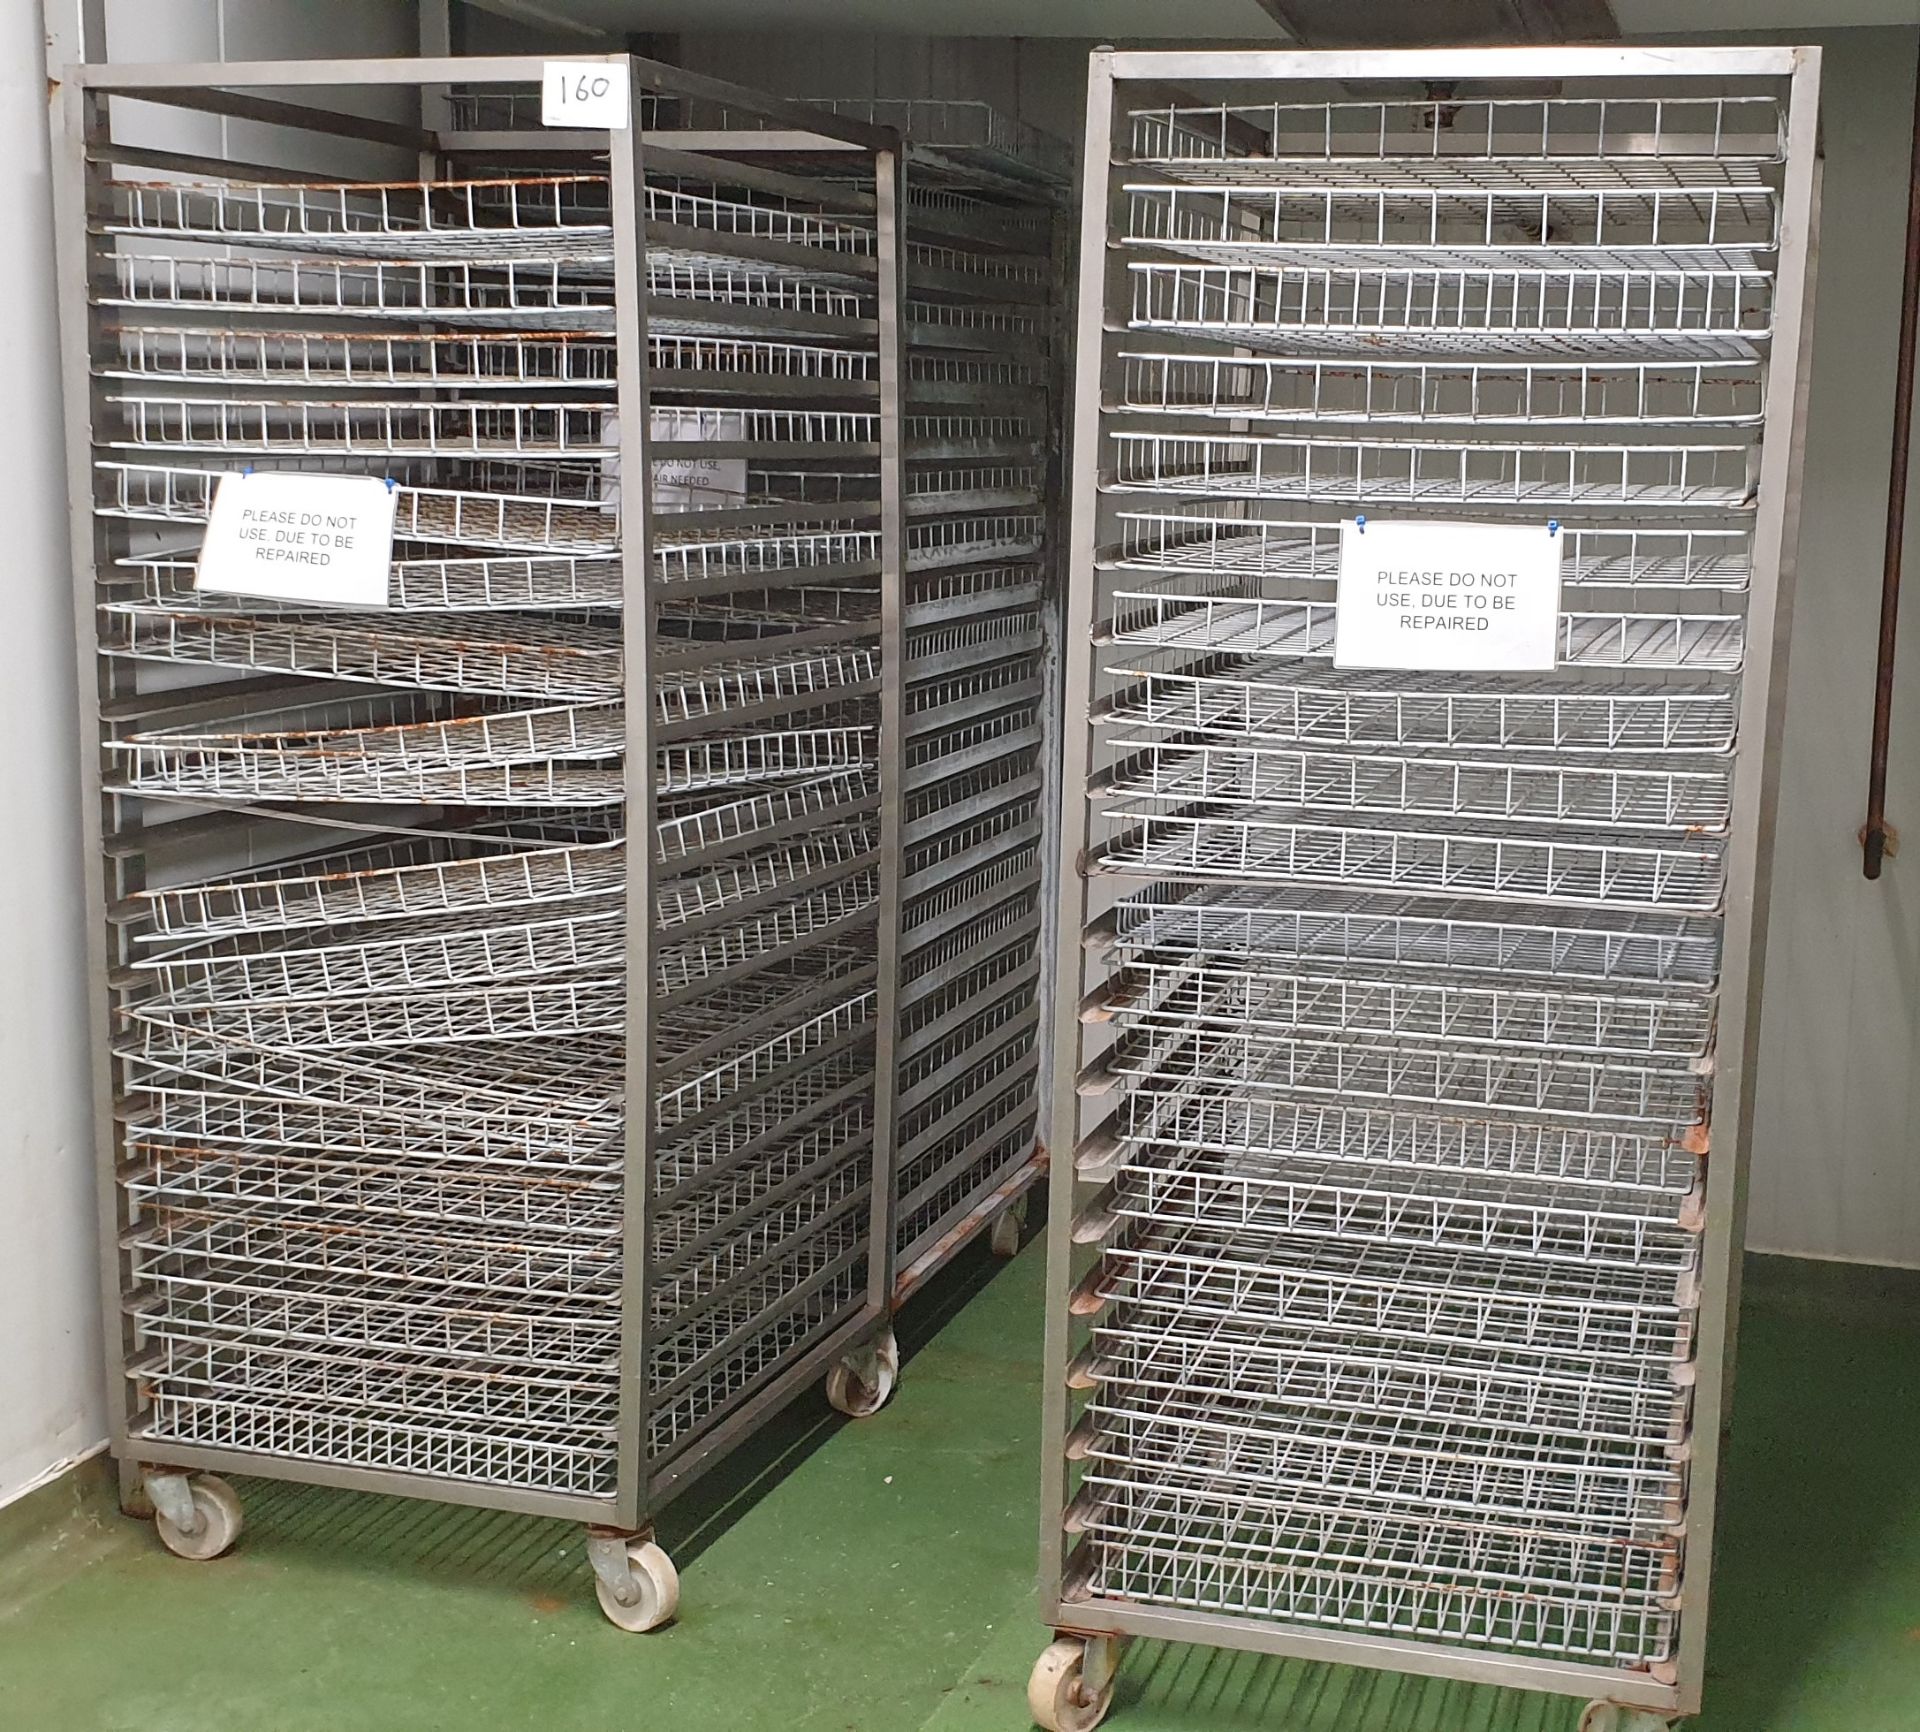 3 x Mobile Tray Racking Units, To be Repaired